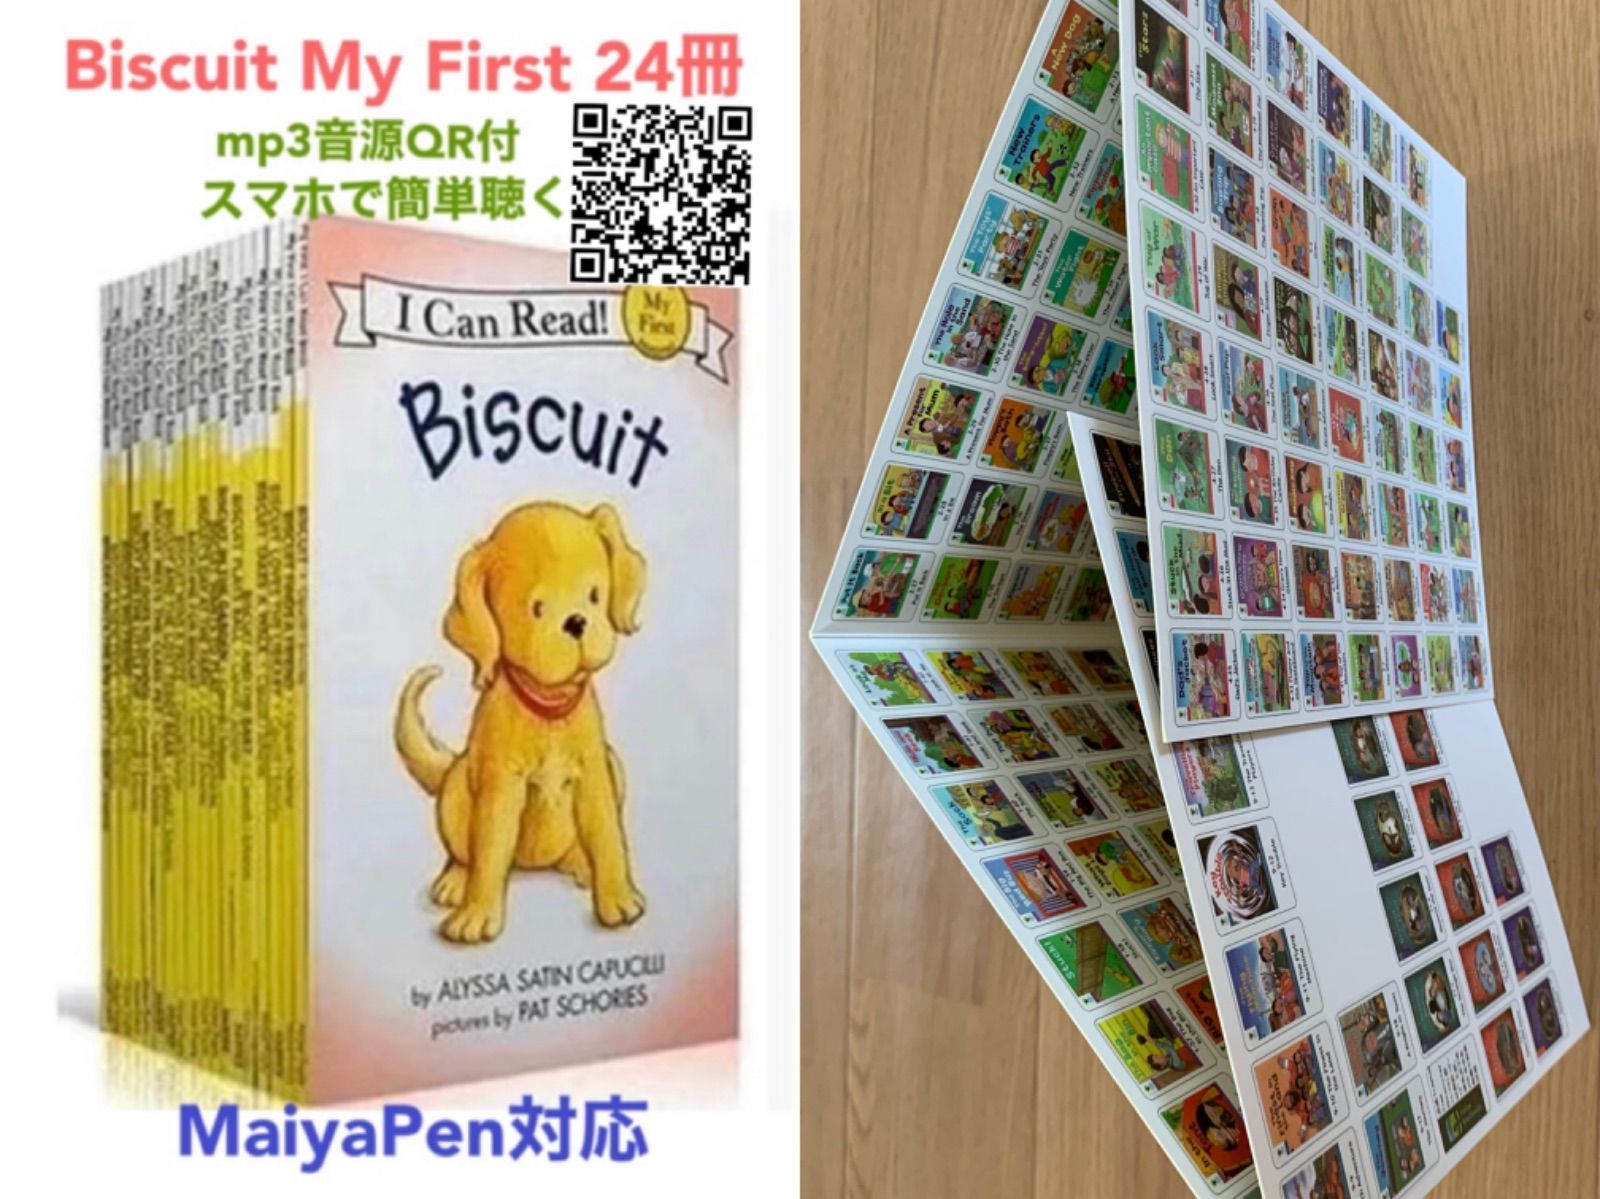 Liao絵本130冊最高品質版＆マイヤペンBiscuit My First 24冊付お得セット 全冊音源 一部動画おまけ Liaoリスト絵本 よくばりカードおまけ - メルカリ